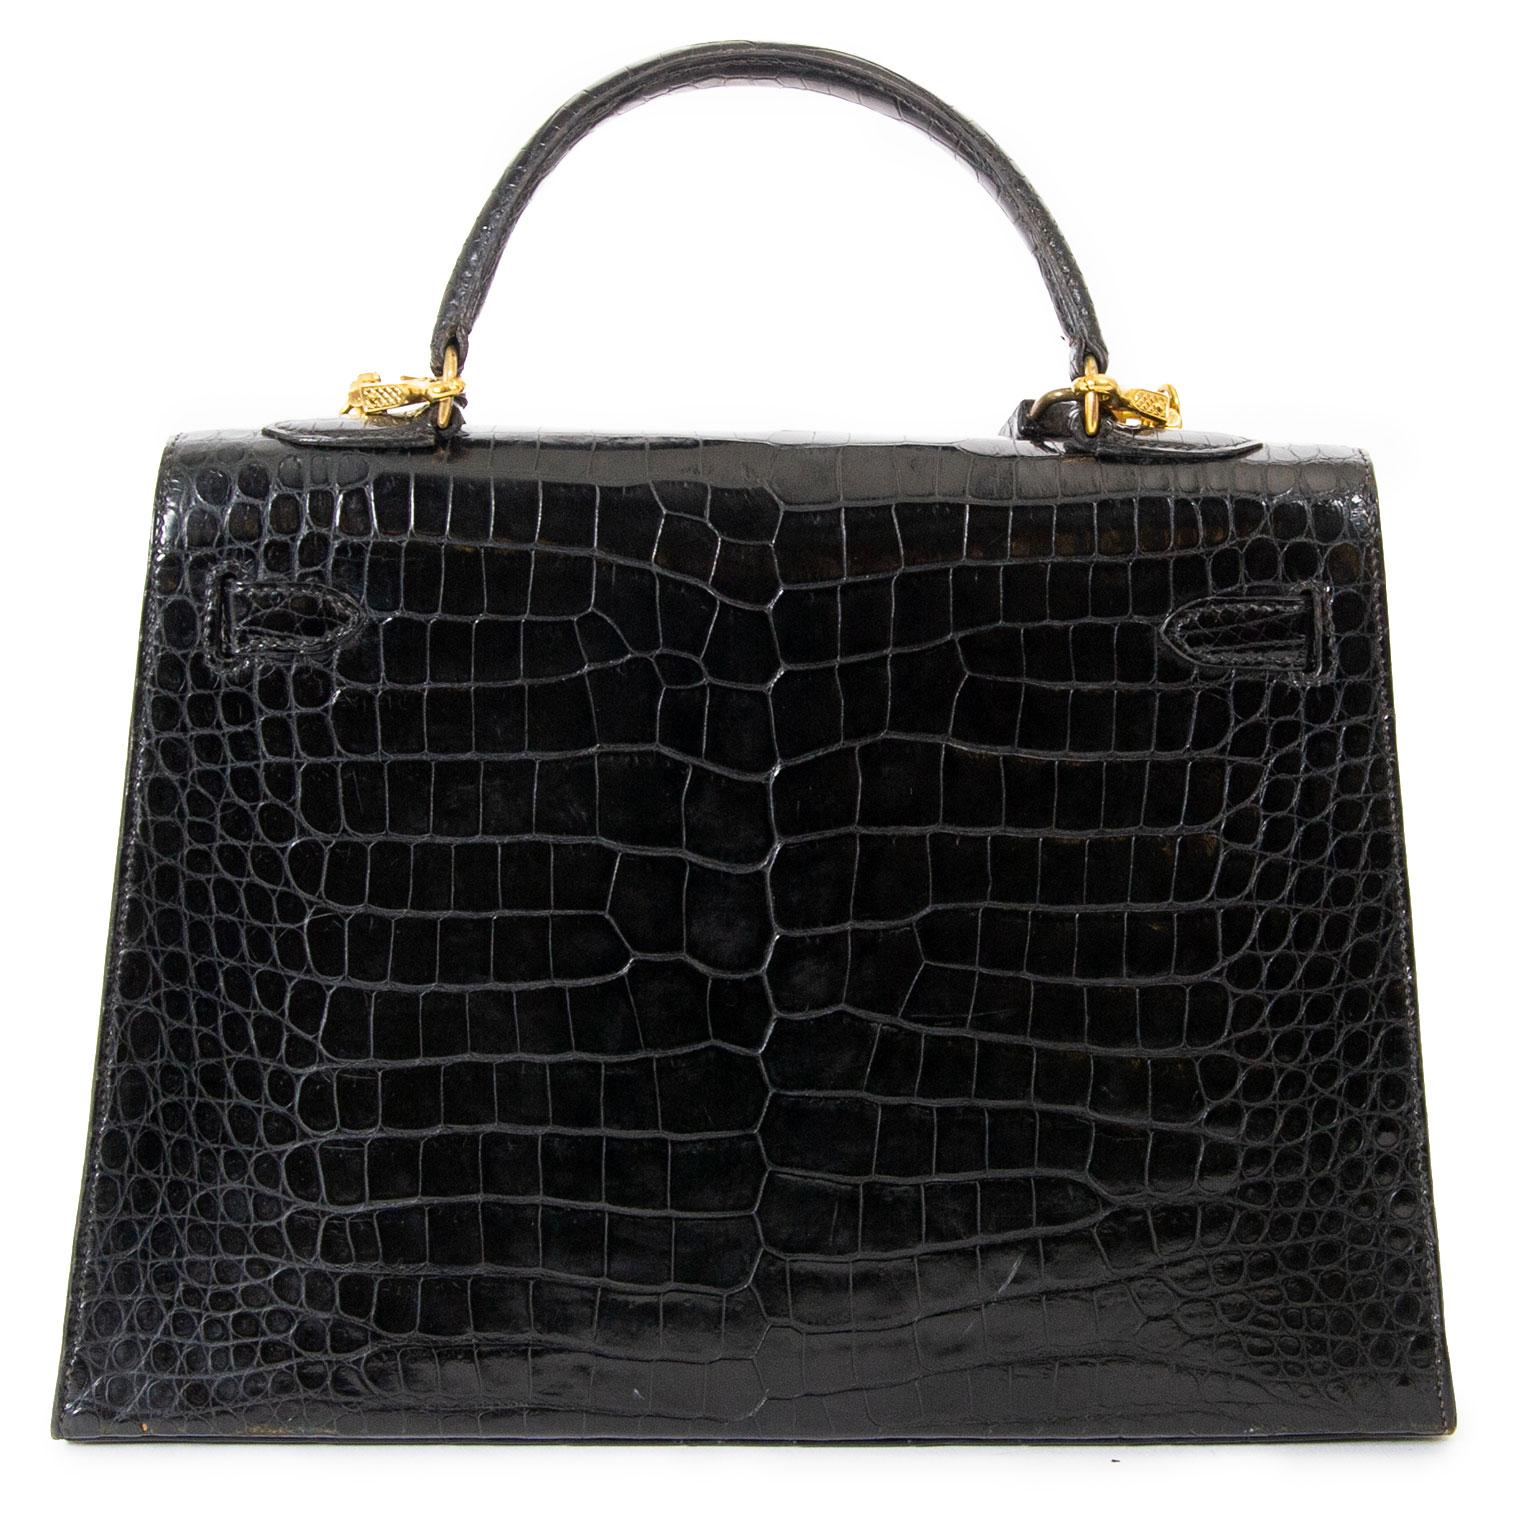 Very Good Vintage condition

Hermes Kelly 32 Black Crocodile GHW + Strap 

The epitome of chicness in the form of a bag, this iconic Hermès Kelly in precious crocodile skin is a true beauty.
The black color makes it extremely versatile and easy to